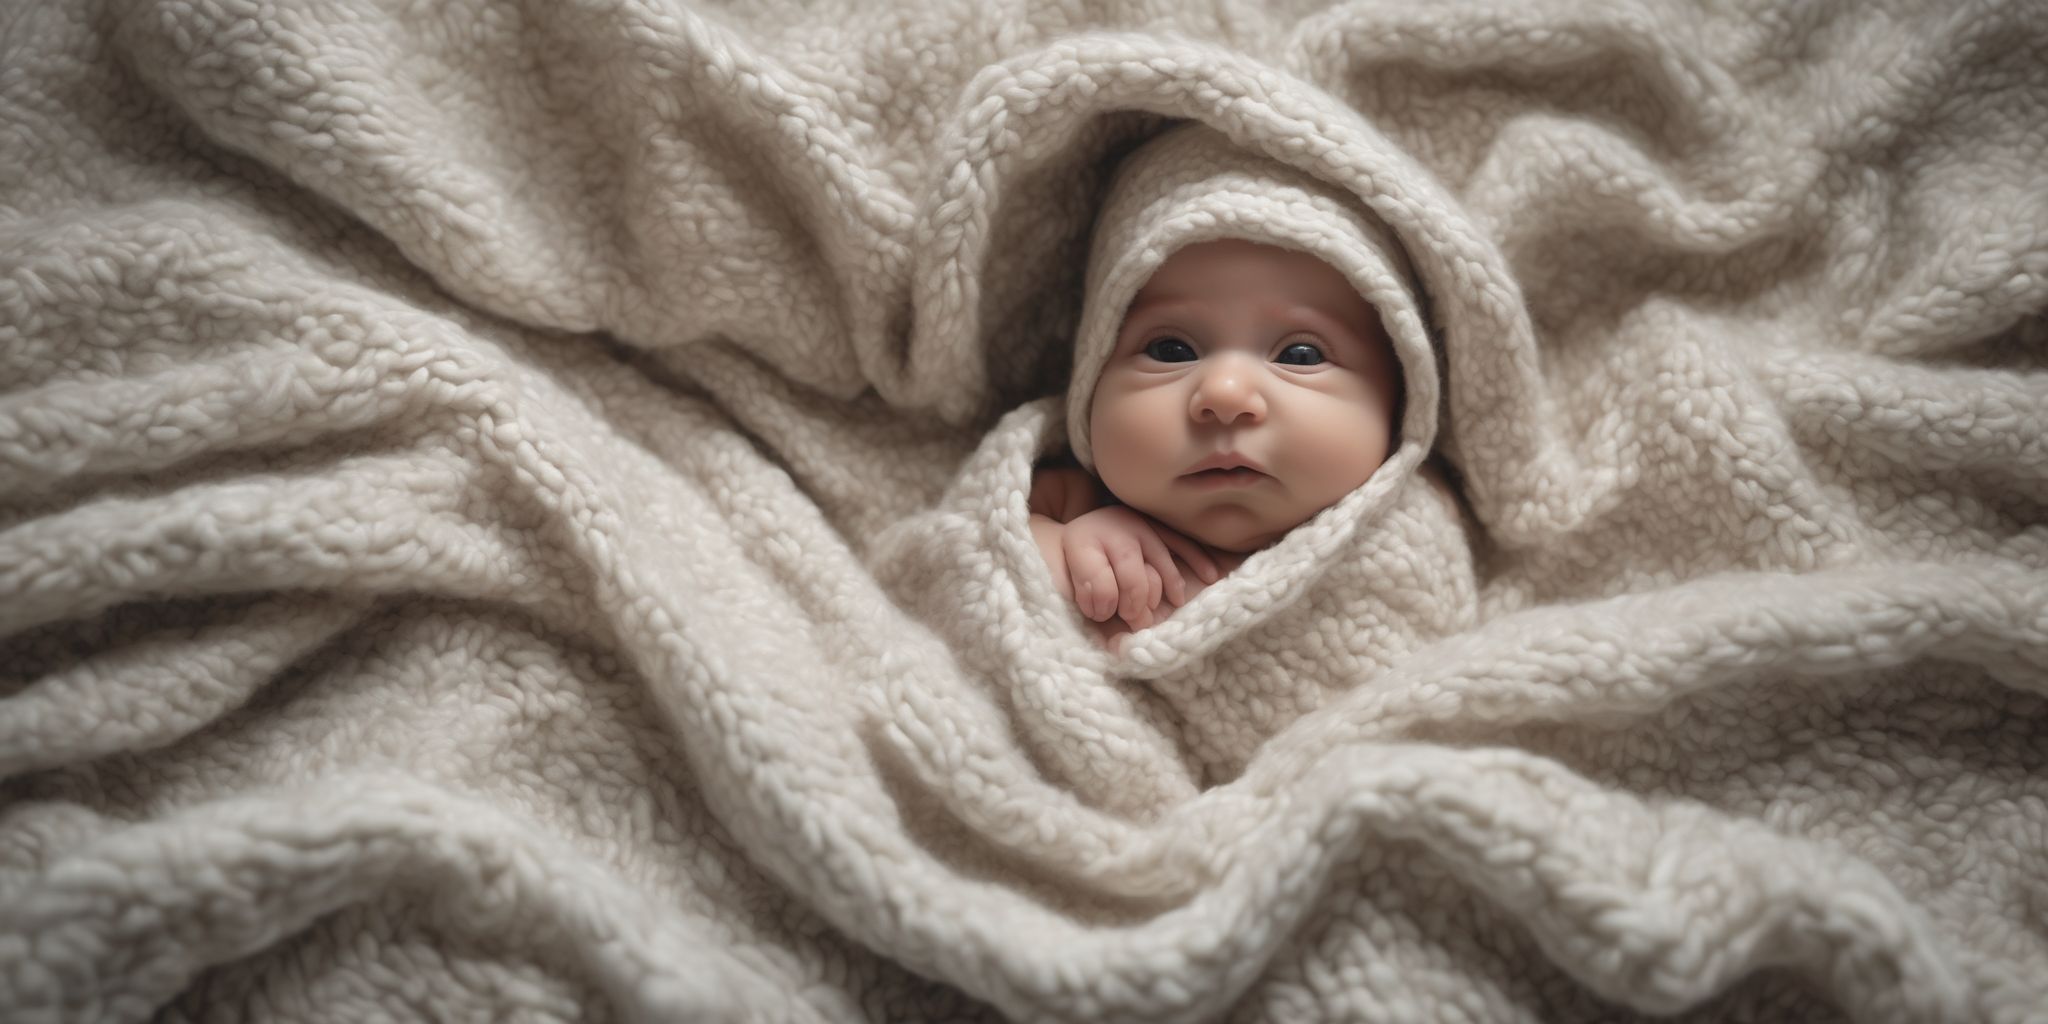 Security blanket  in realistic, photographic style